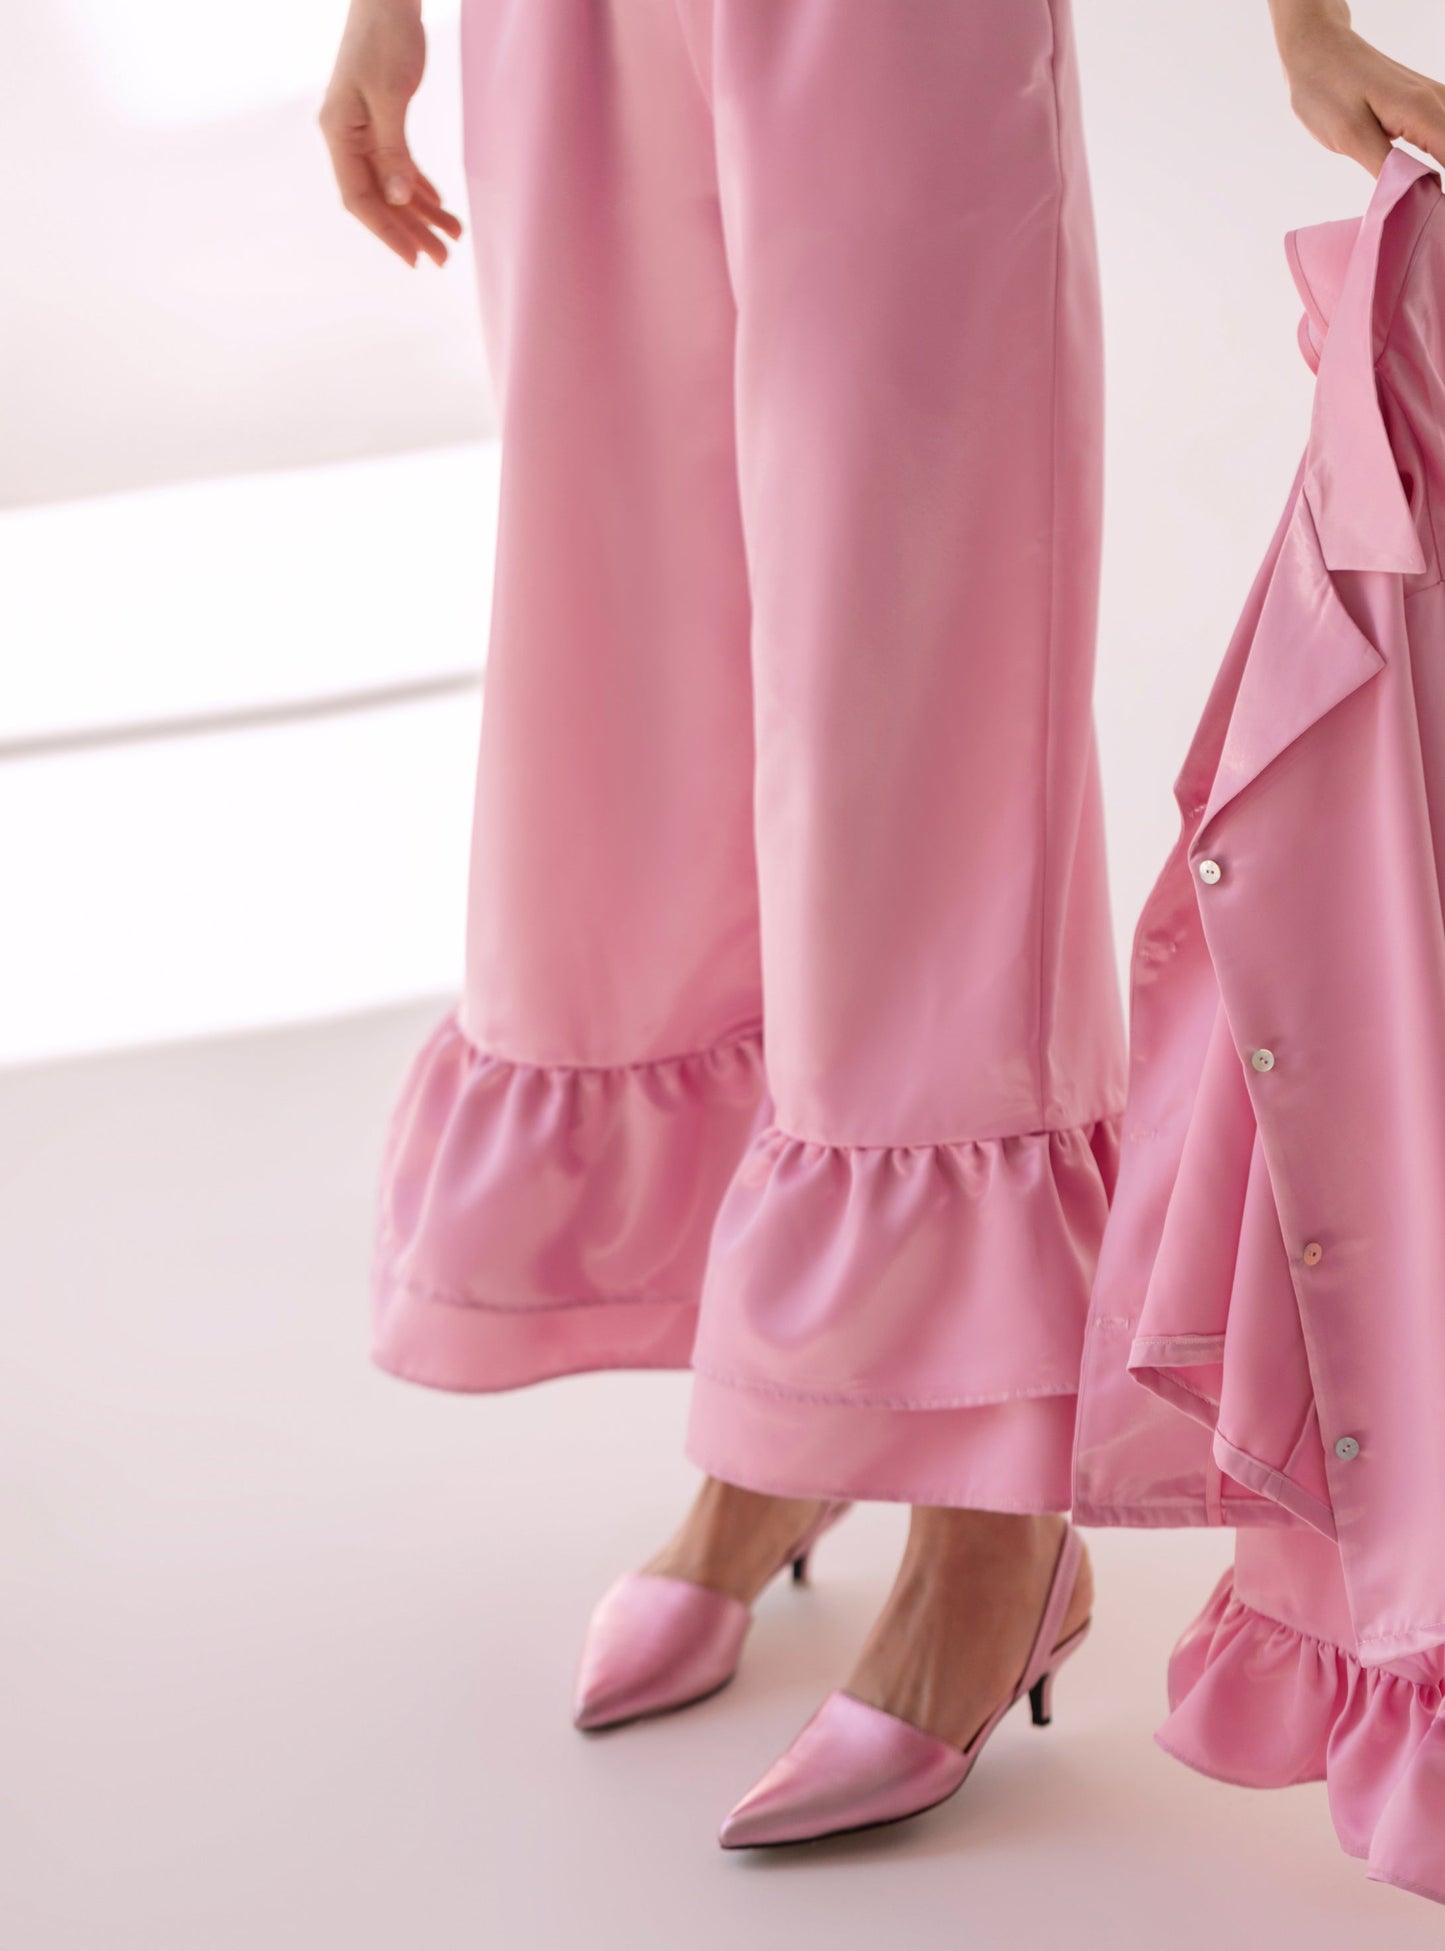 Pink pants with ruffles